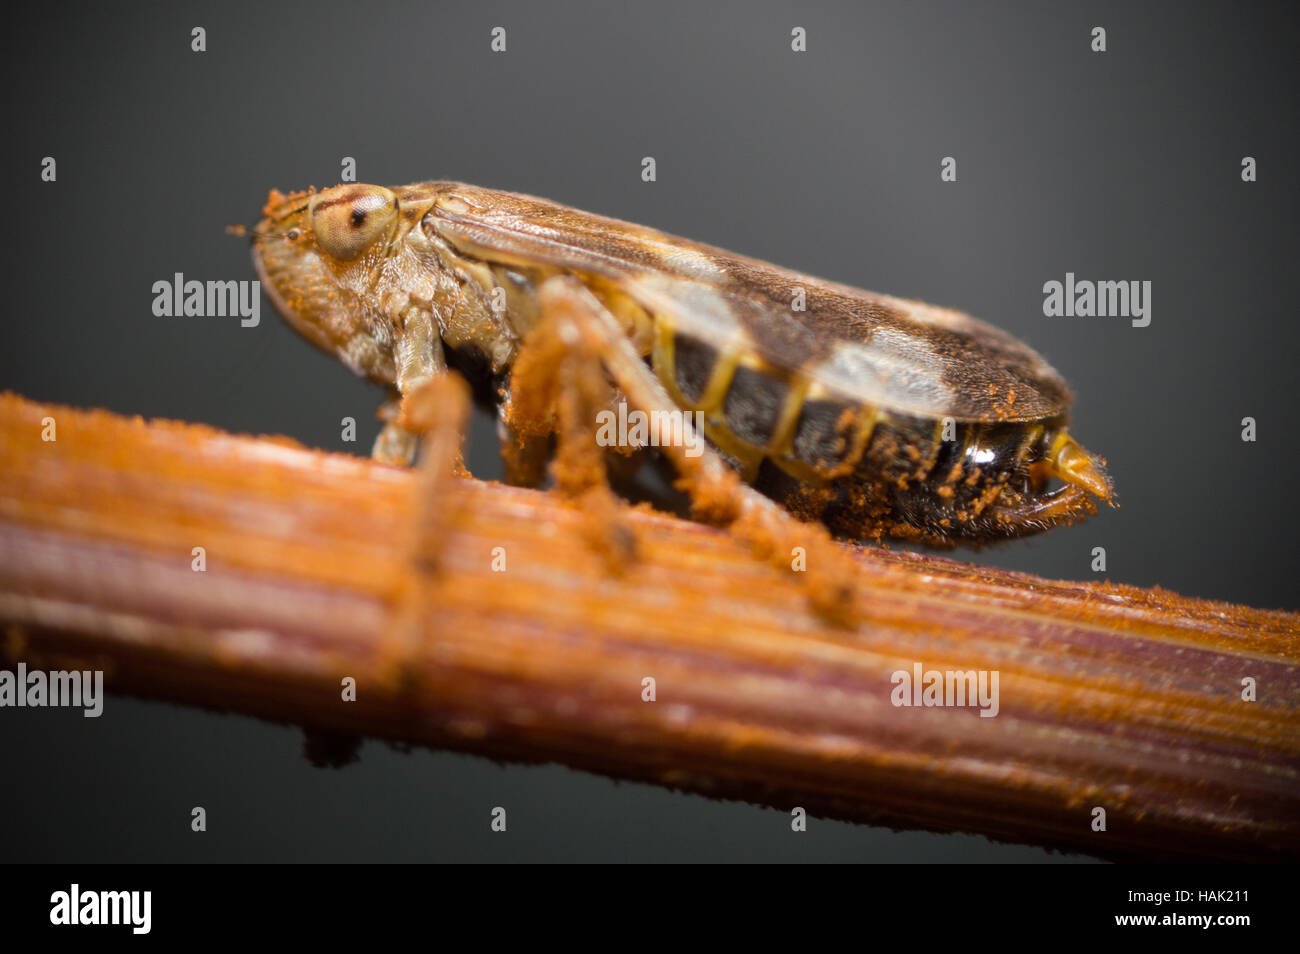 A close-up of a Froghopper on a plant stem. Stock Photo